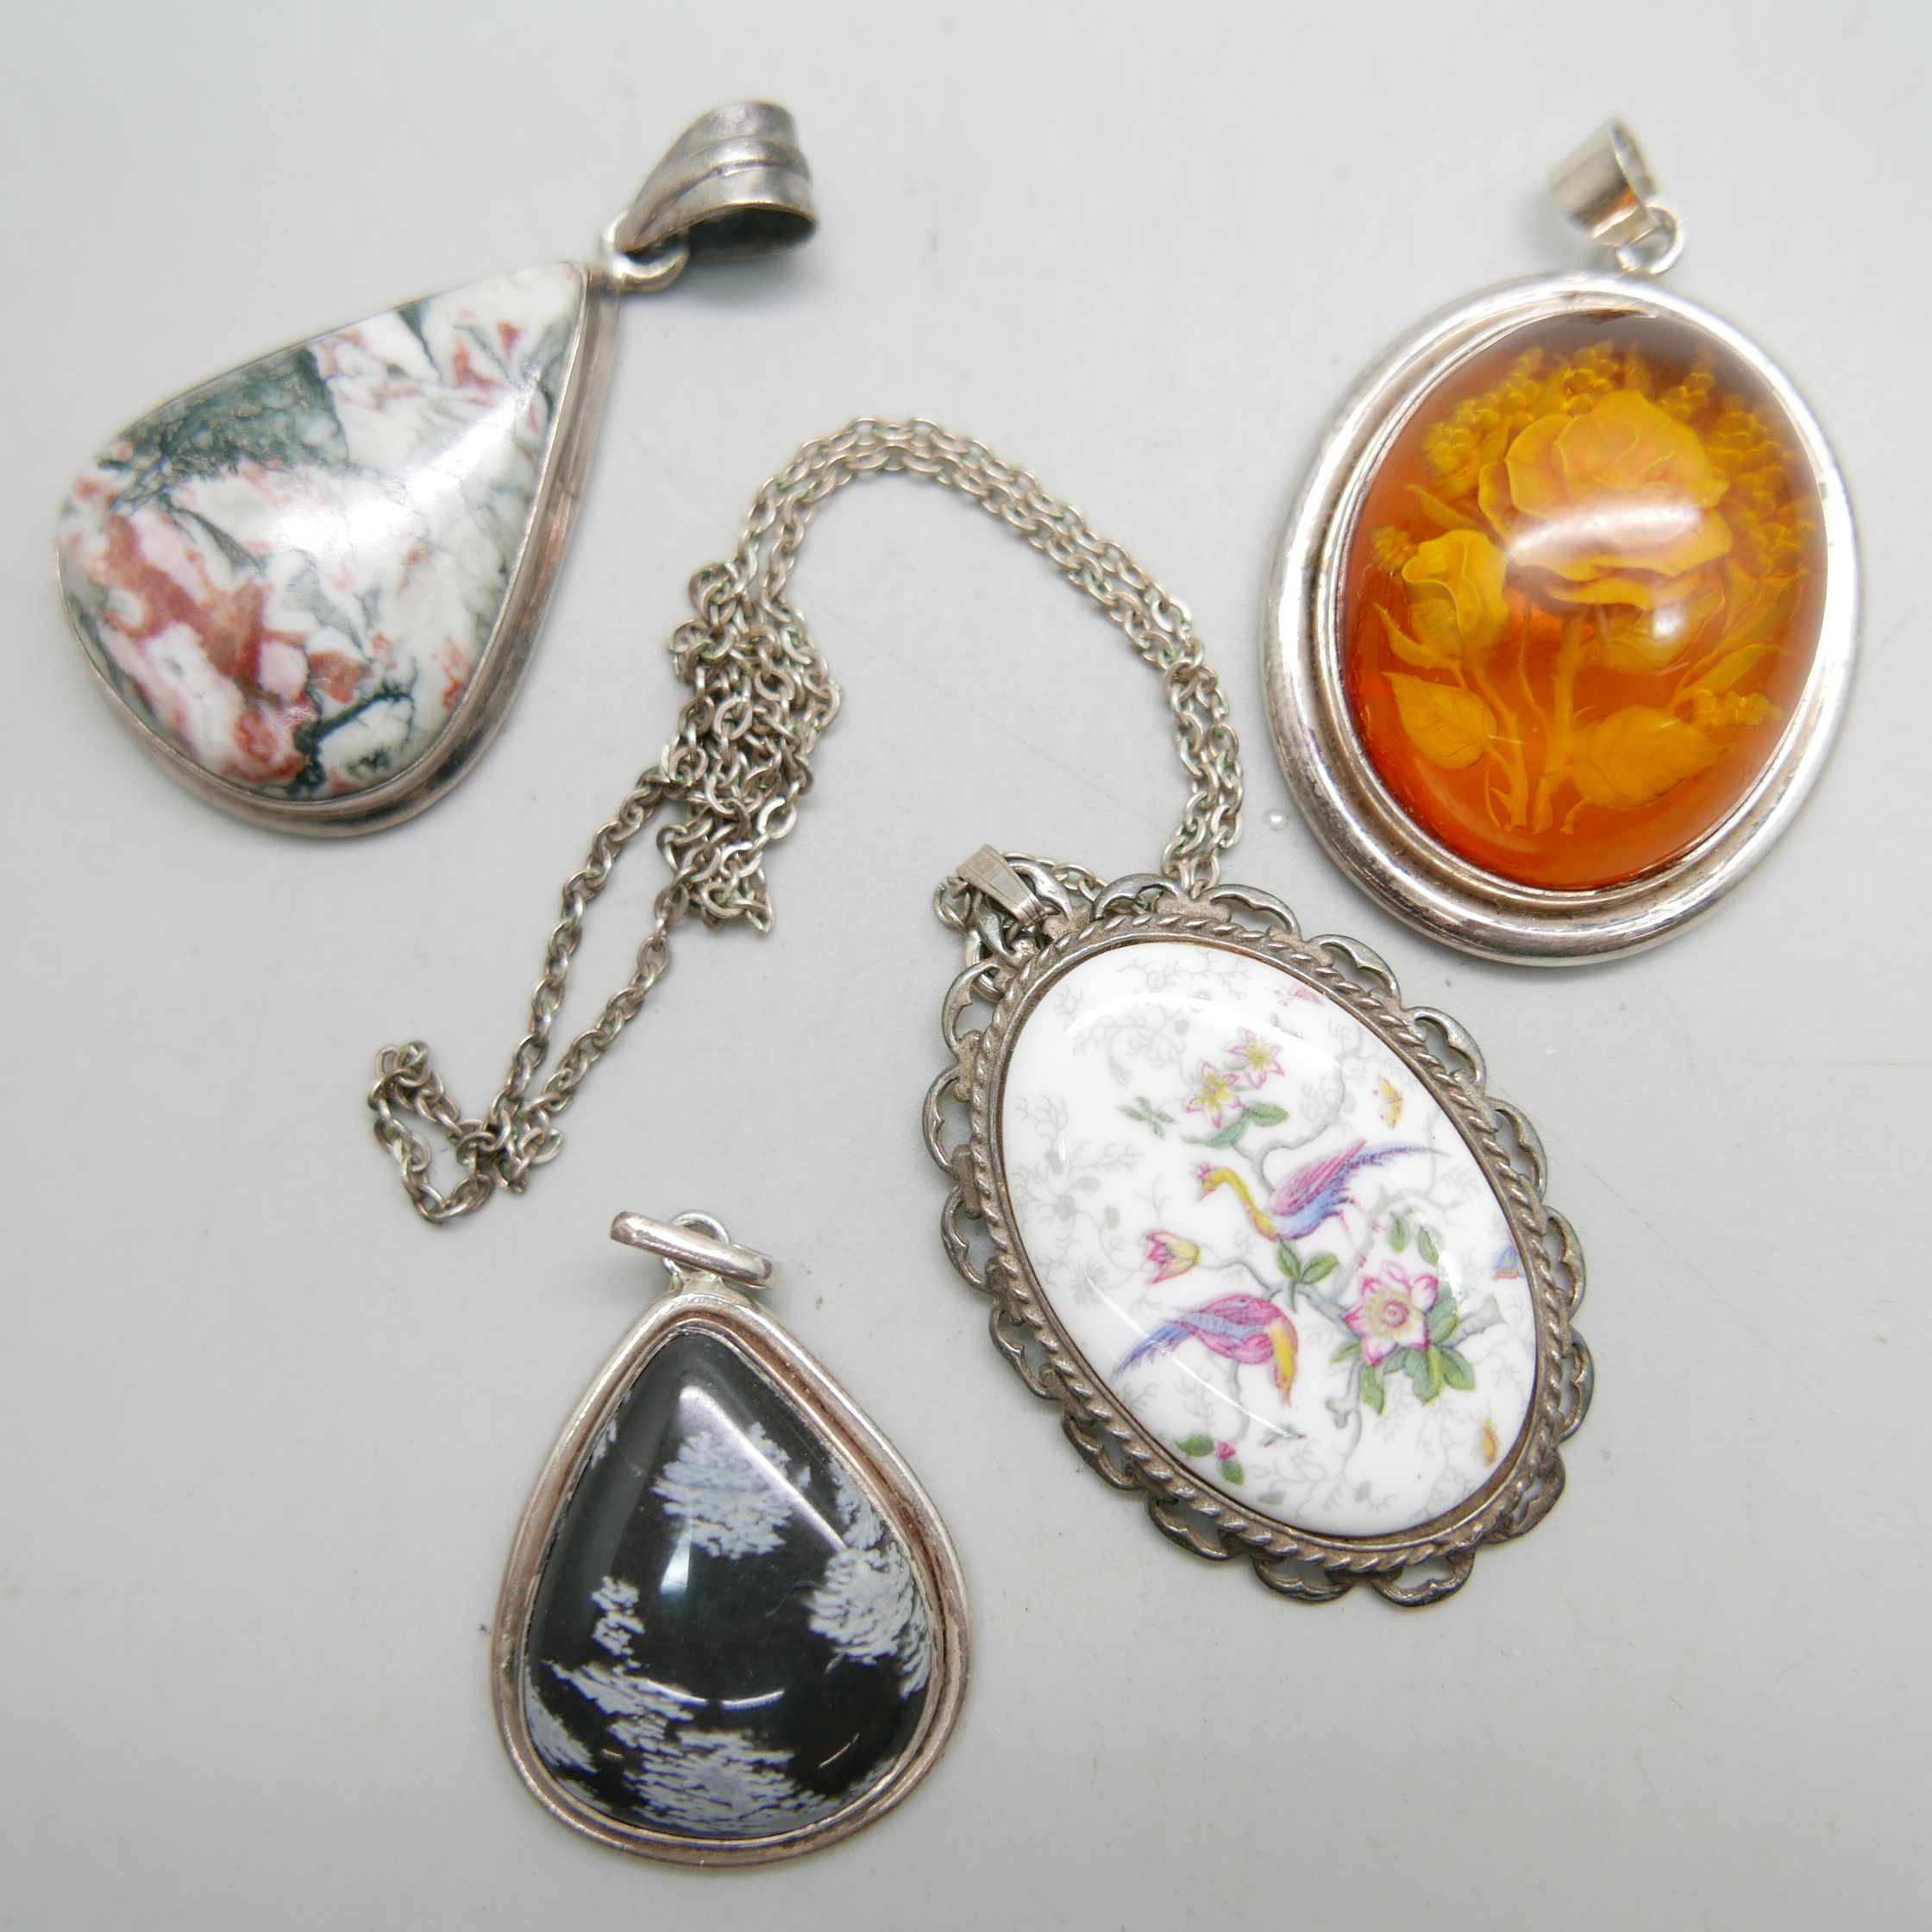 A hallmarked silver Coalport plaque pendant, a silver and amber coloured pendant, and two other - Image 2 of 2